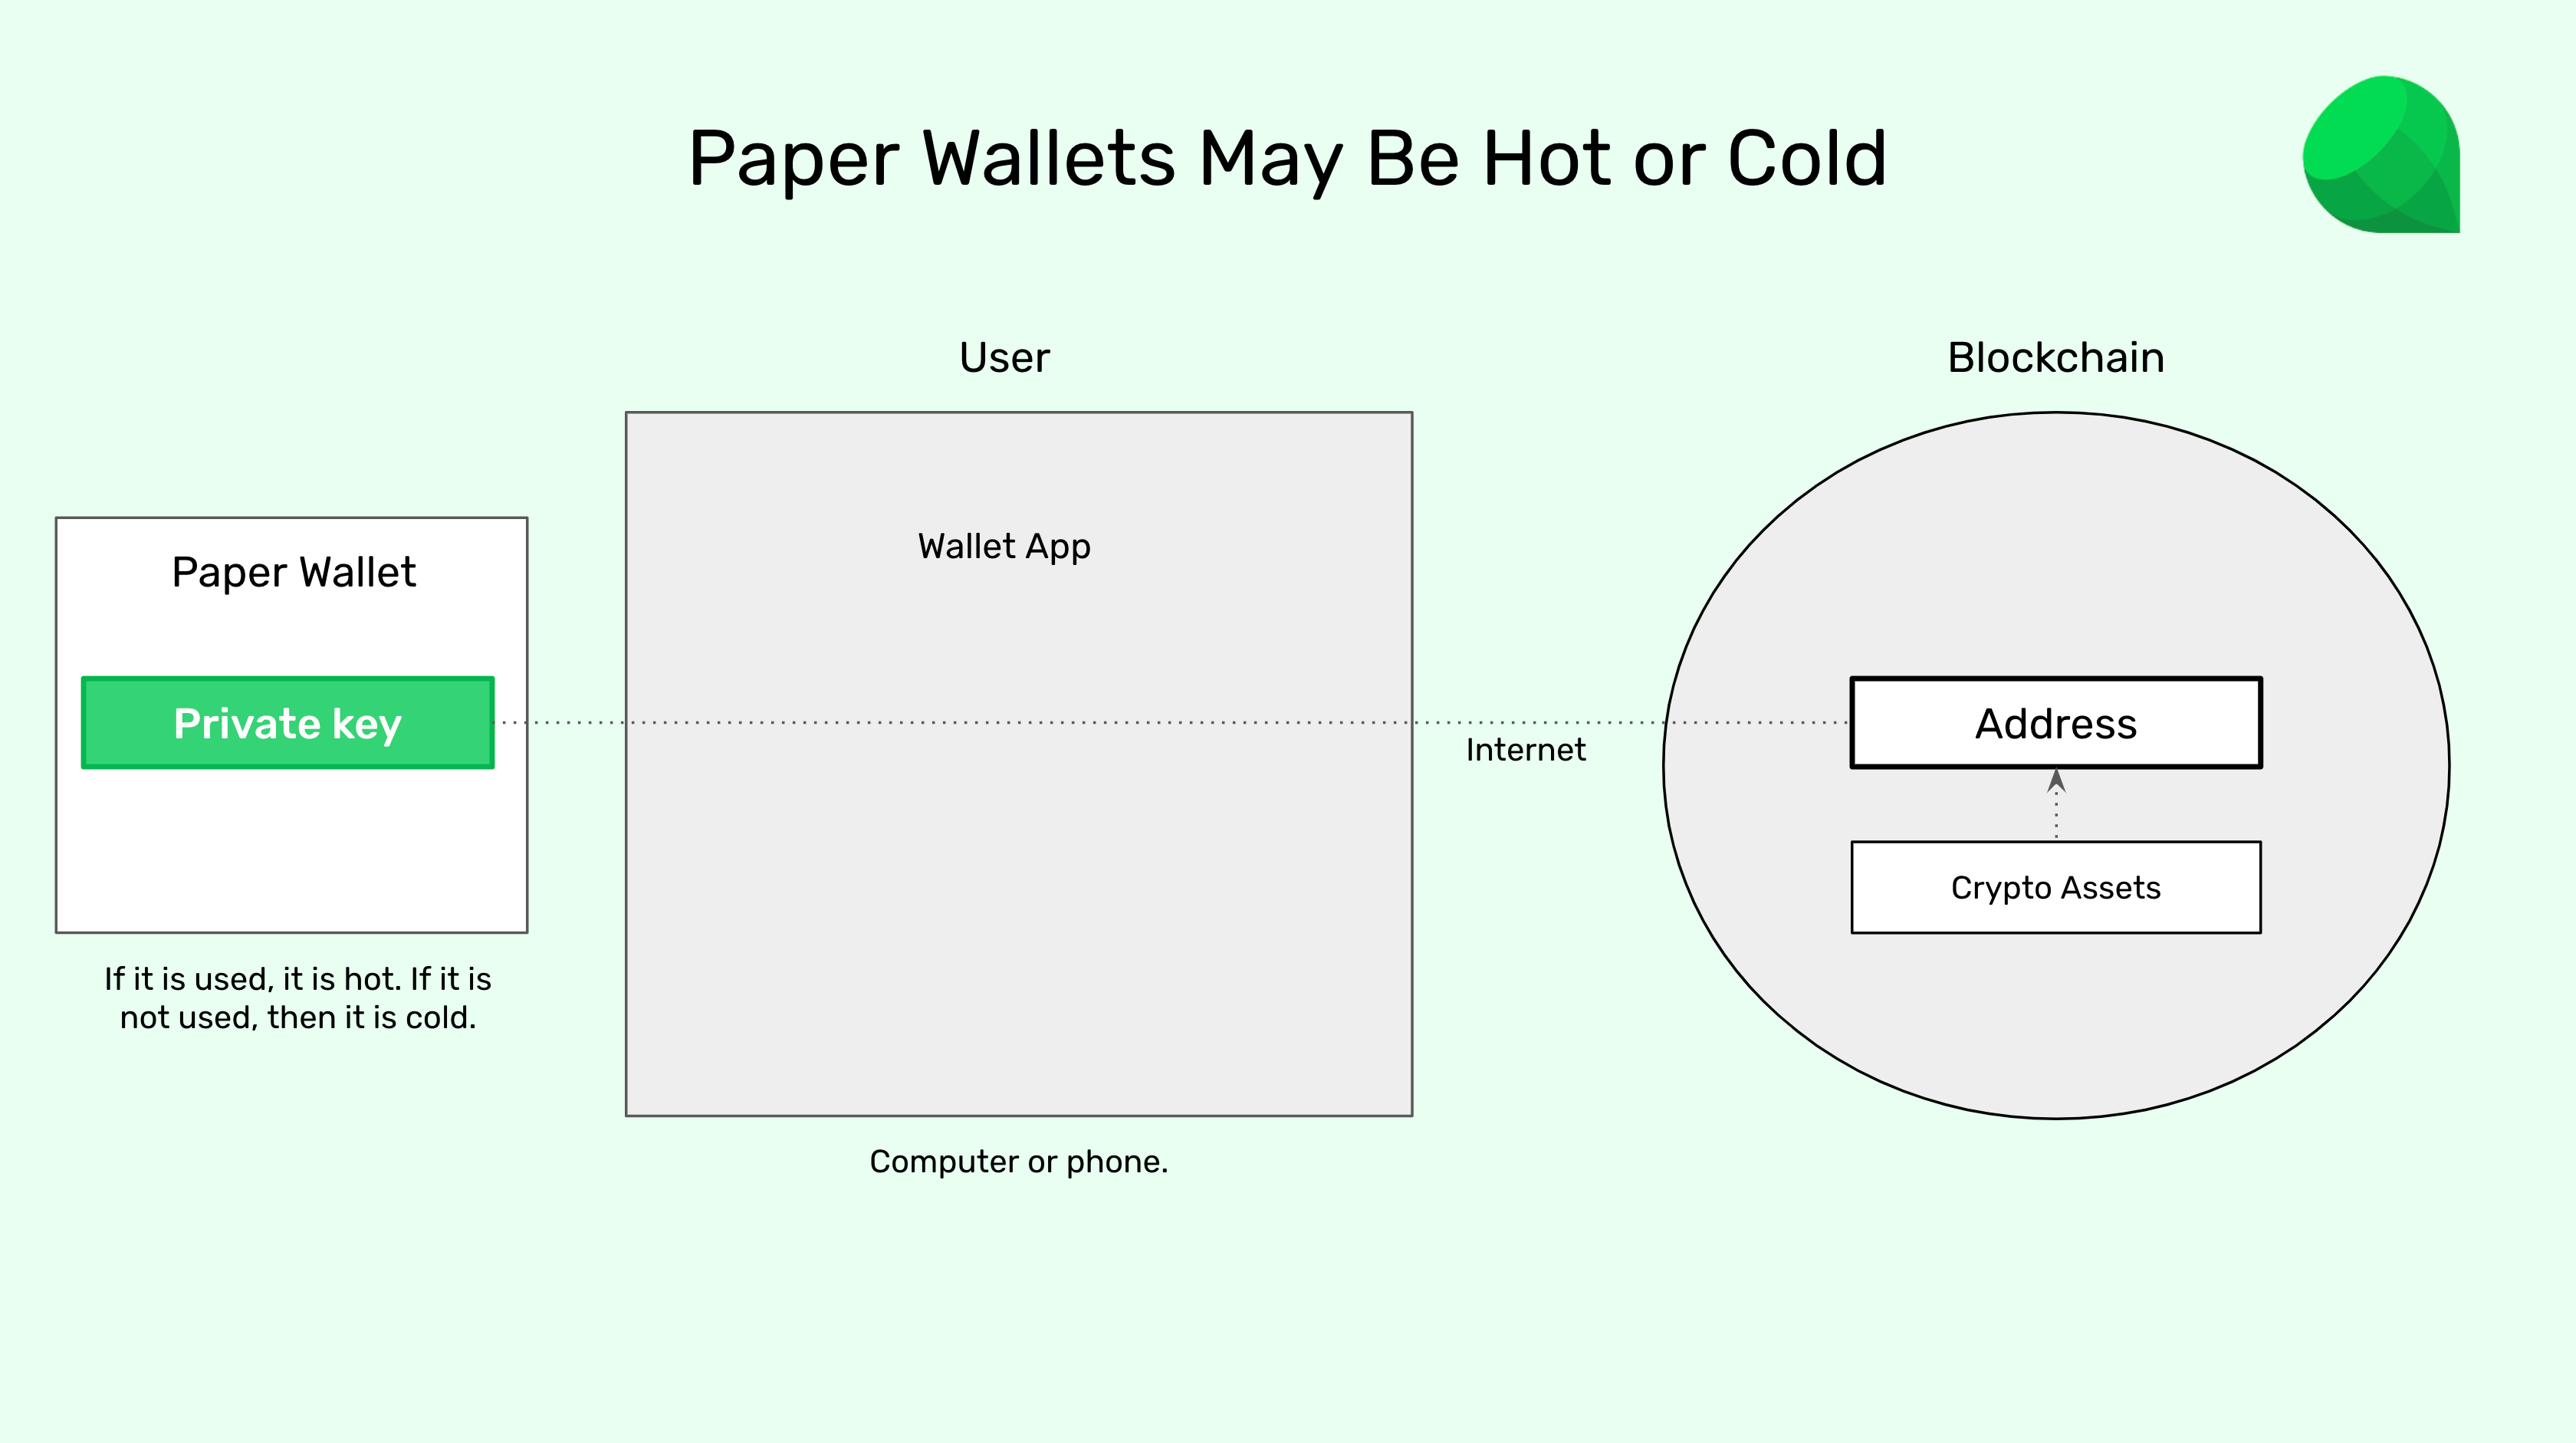 Paper wallets may be hot or cold